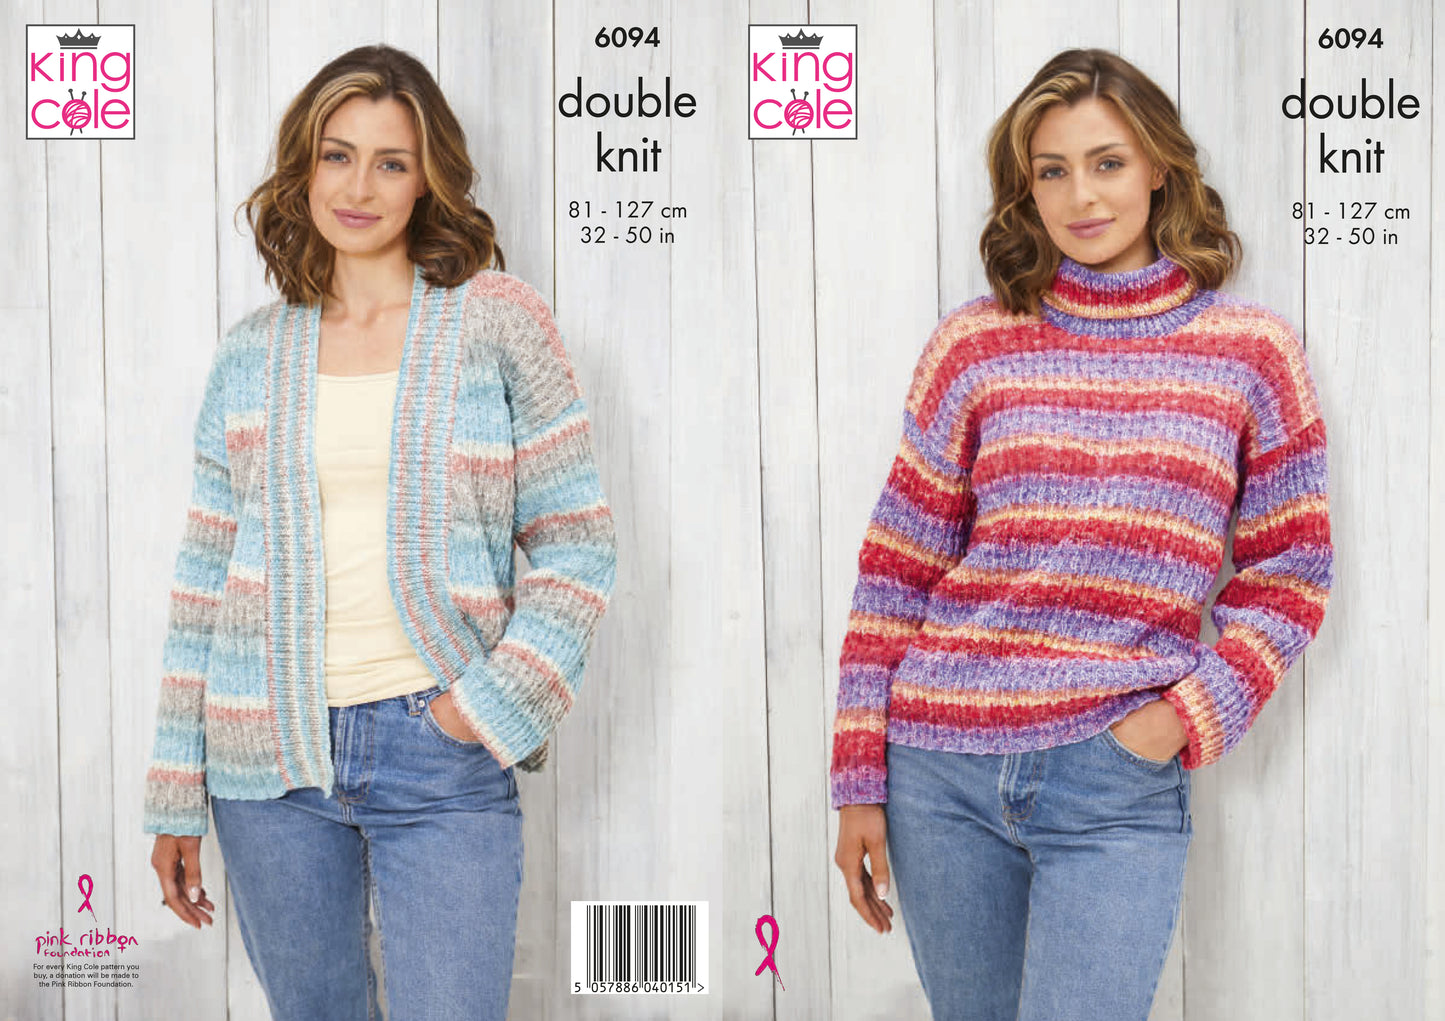 King Cole Pattern 6094 - Ladies Edge to Edge Cardigan and Sweater